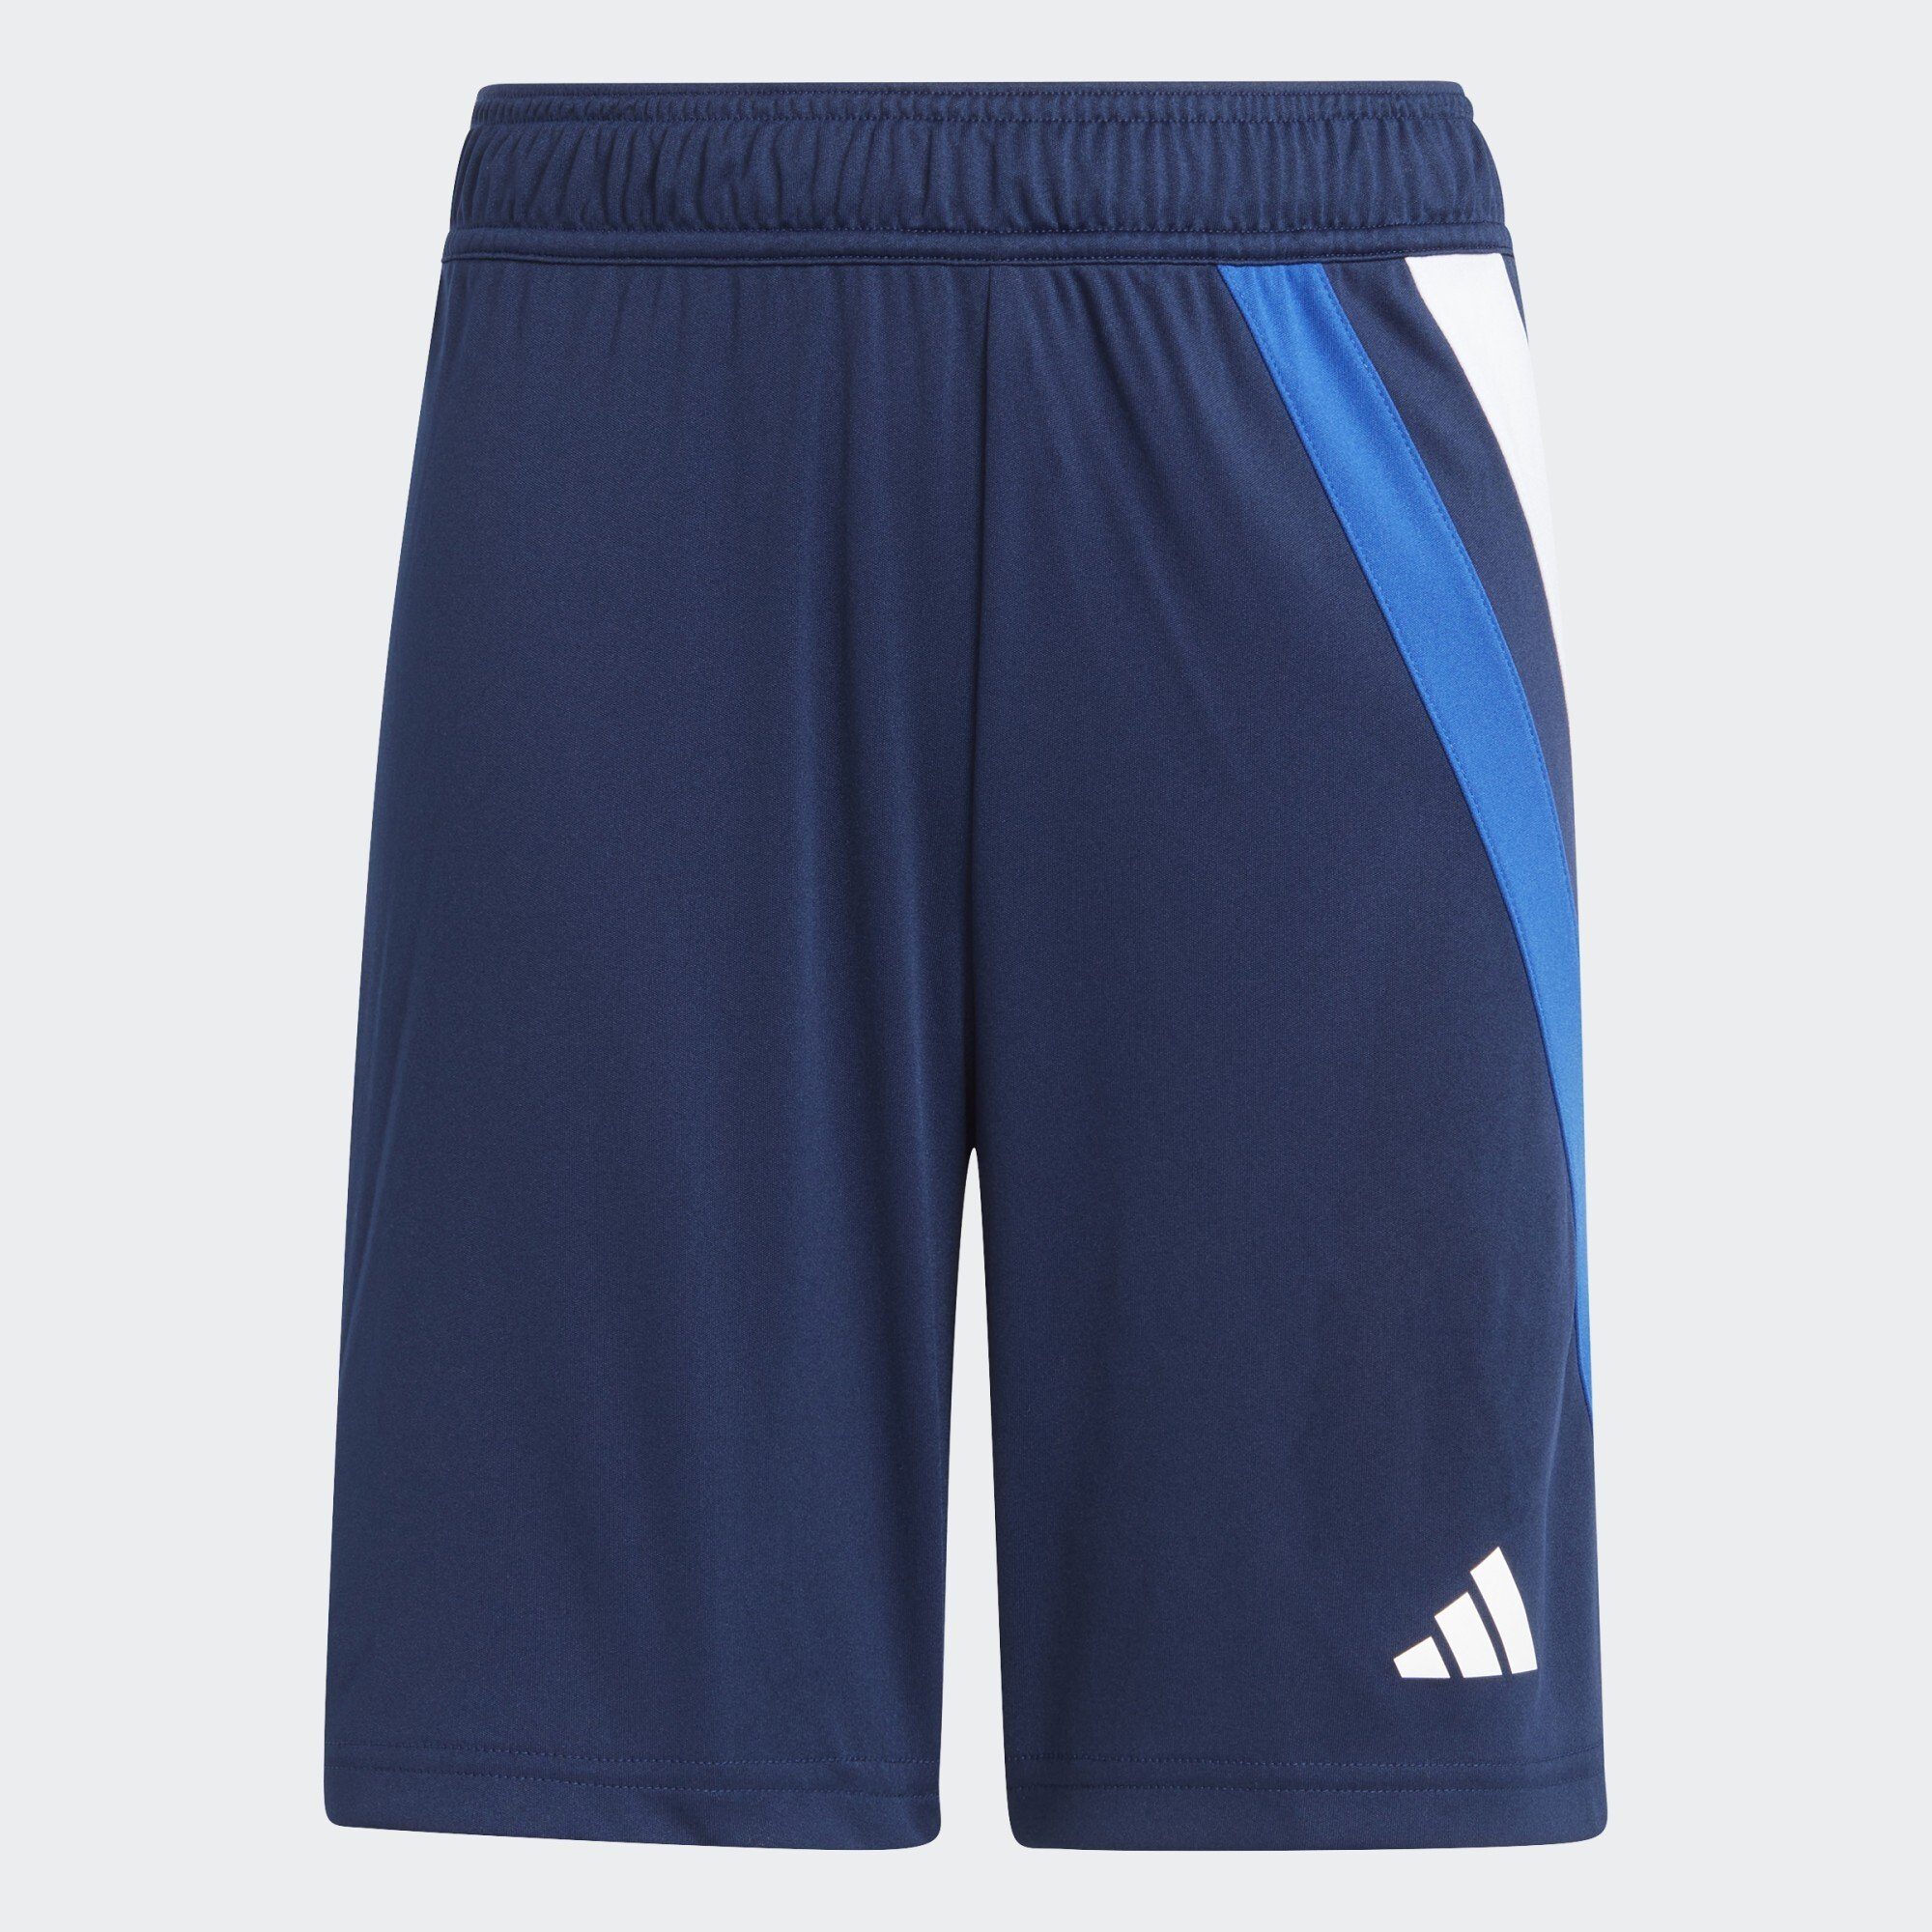 adidas Performance Funktionsshorts Collegiate Blue Navy Red / FORTORE White 2 Team Team Blue Royal 23 / / SHORTS